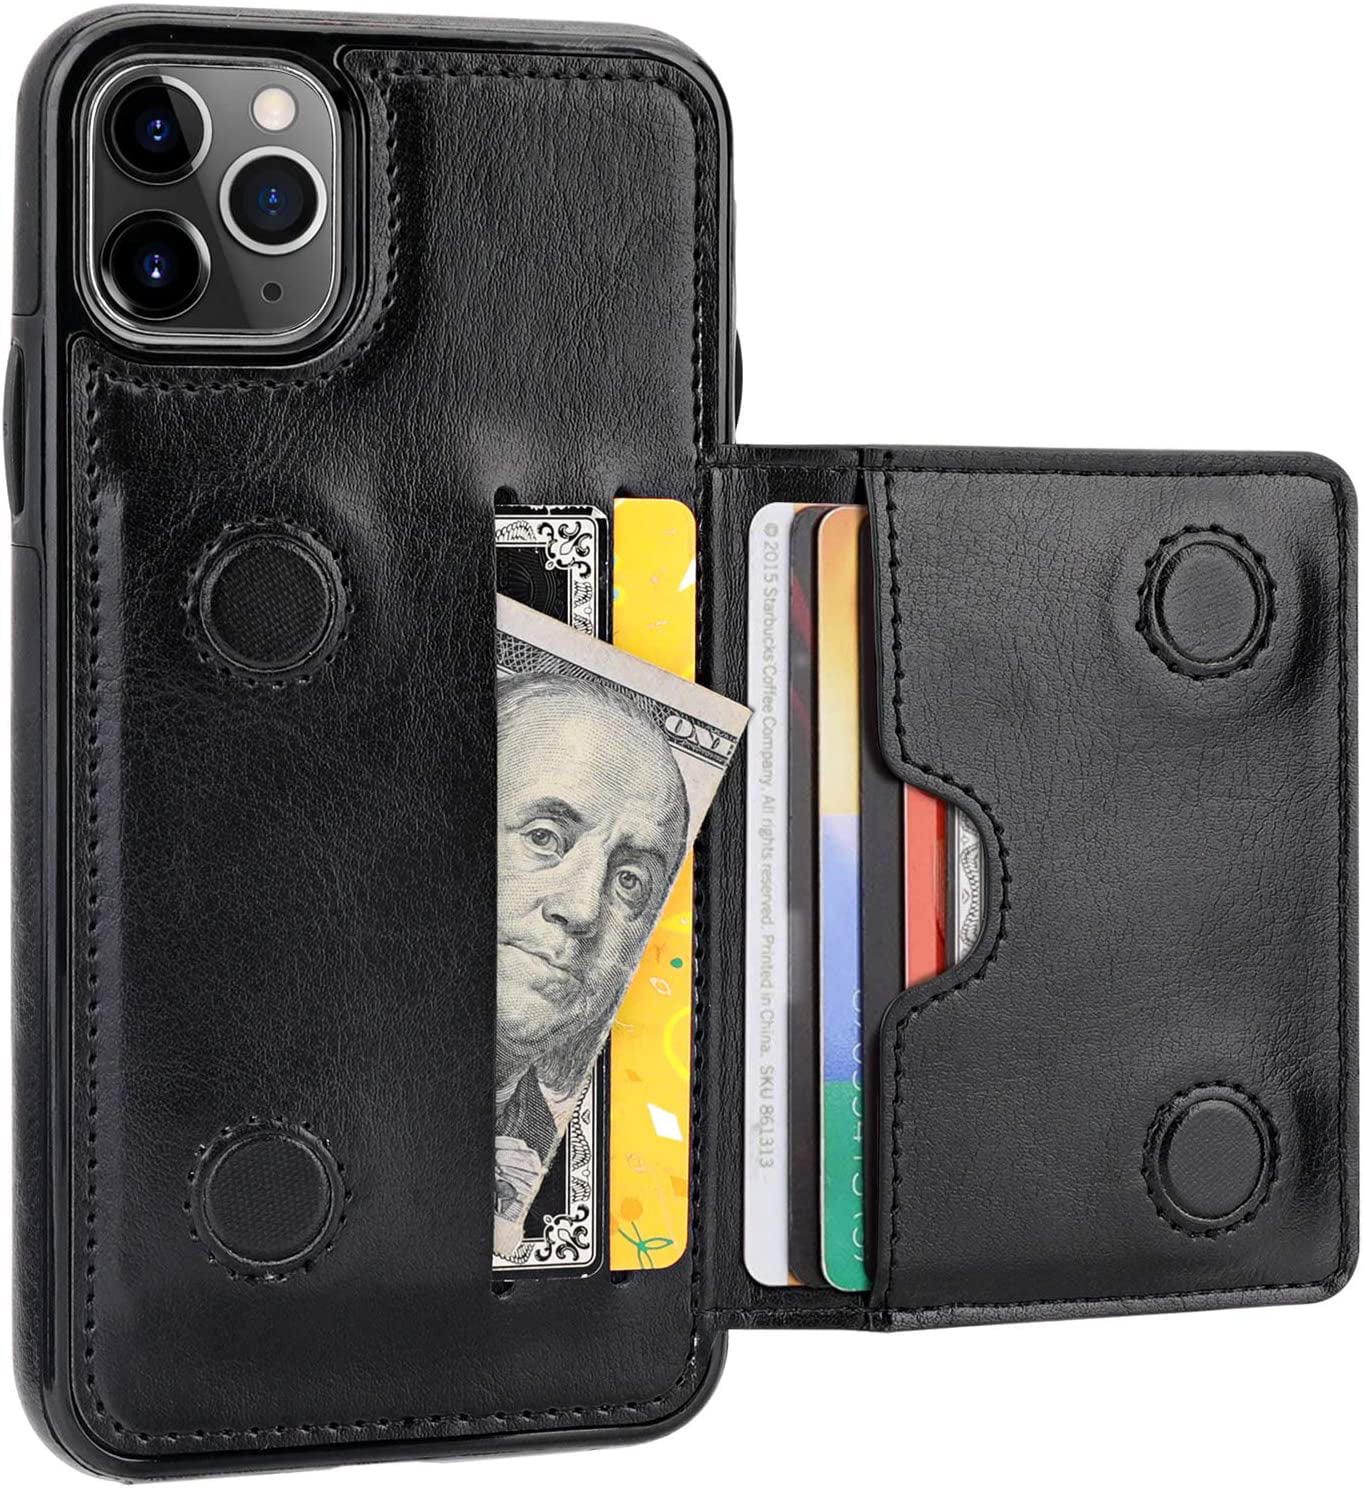 Scooch iPhone 11 Pro Max Wallet Case with Credit Card Holder - Wingmate